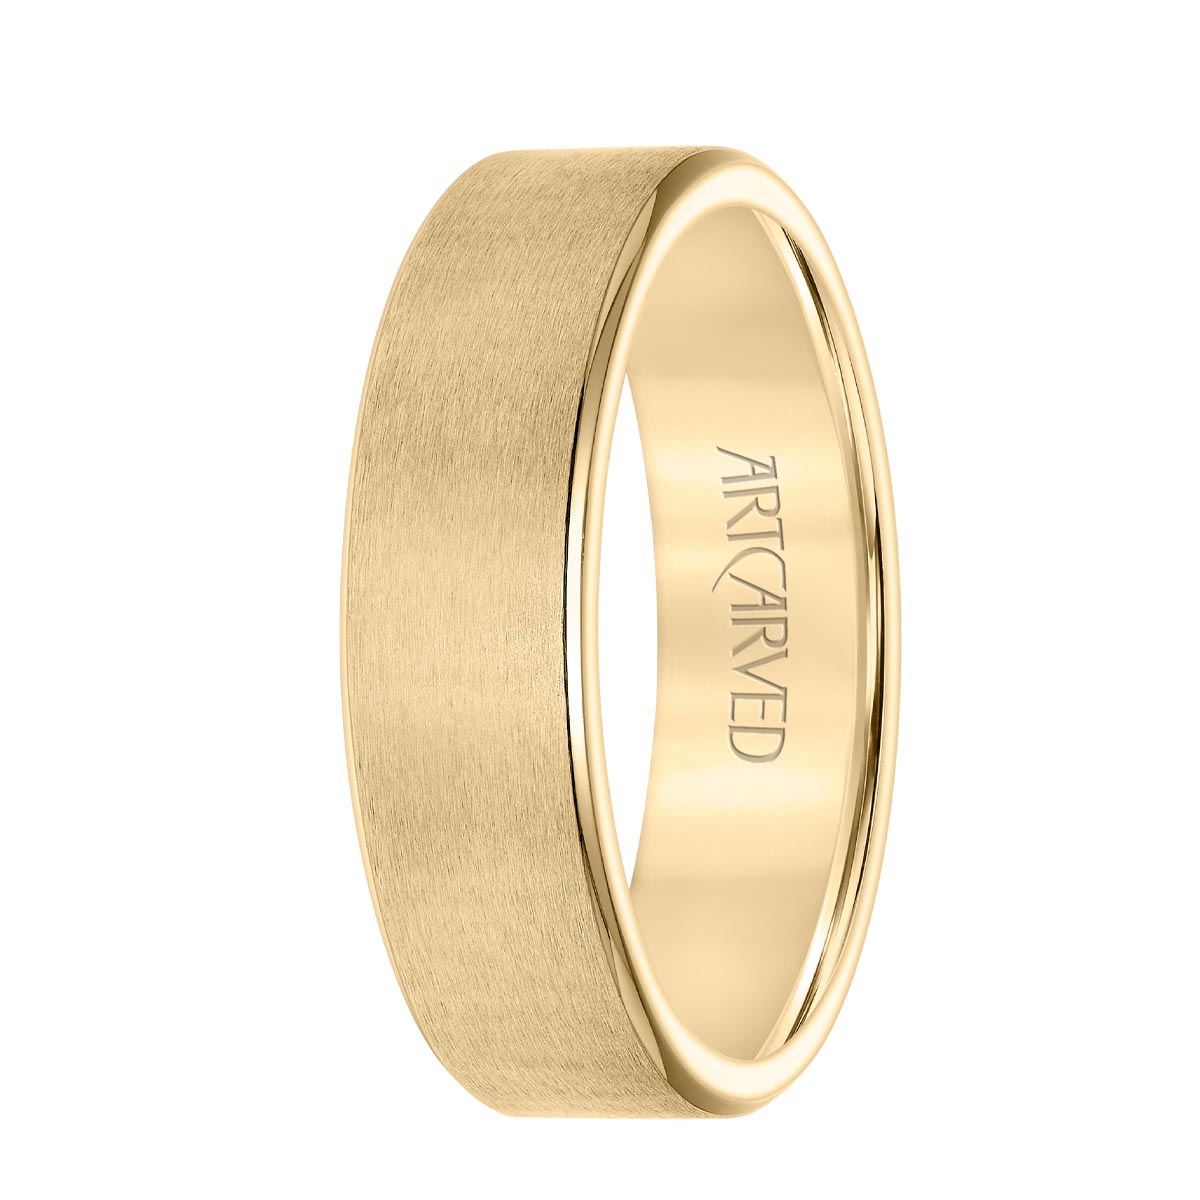 Men's Wedding Band in 14kt Yellow Gold (6mm)